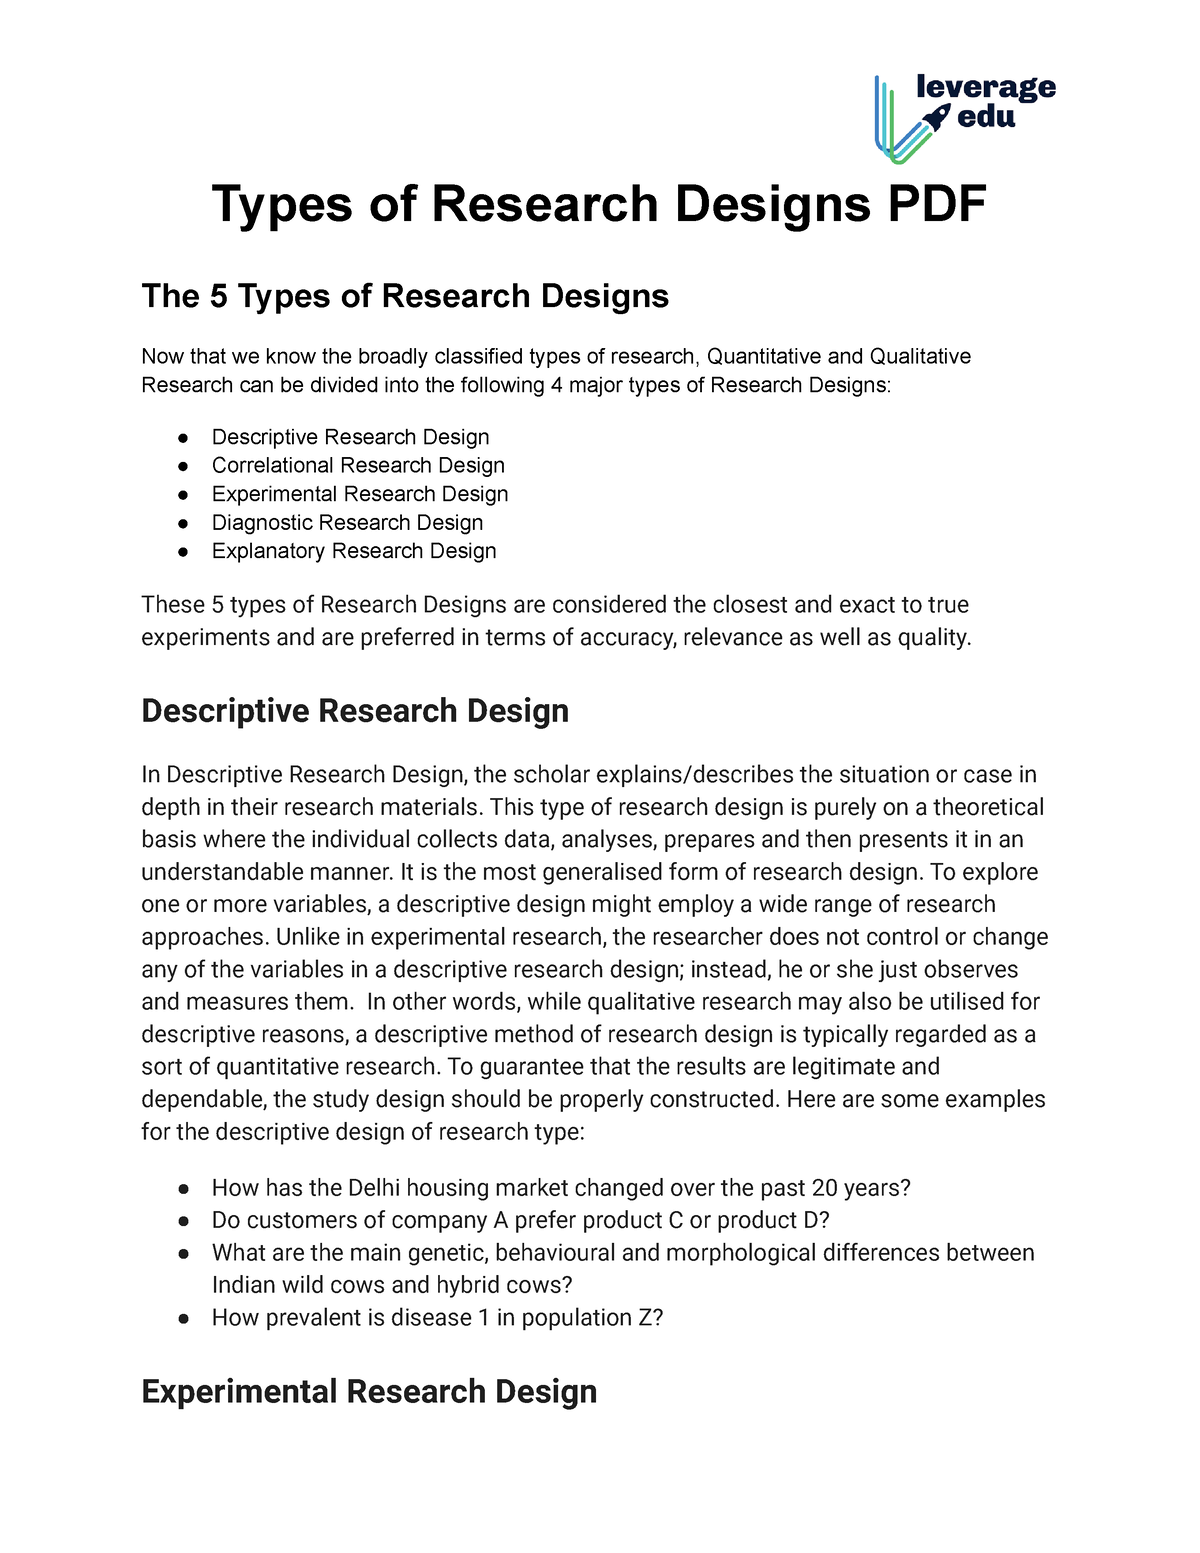 what is a research design pdf 2020